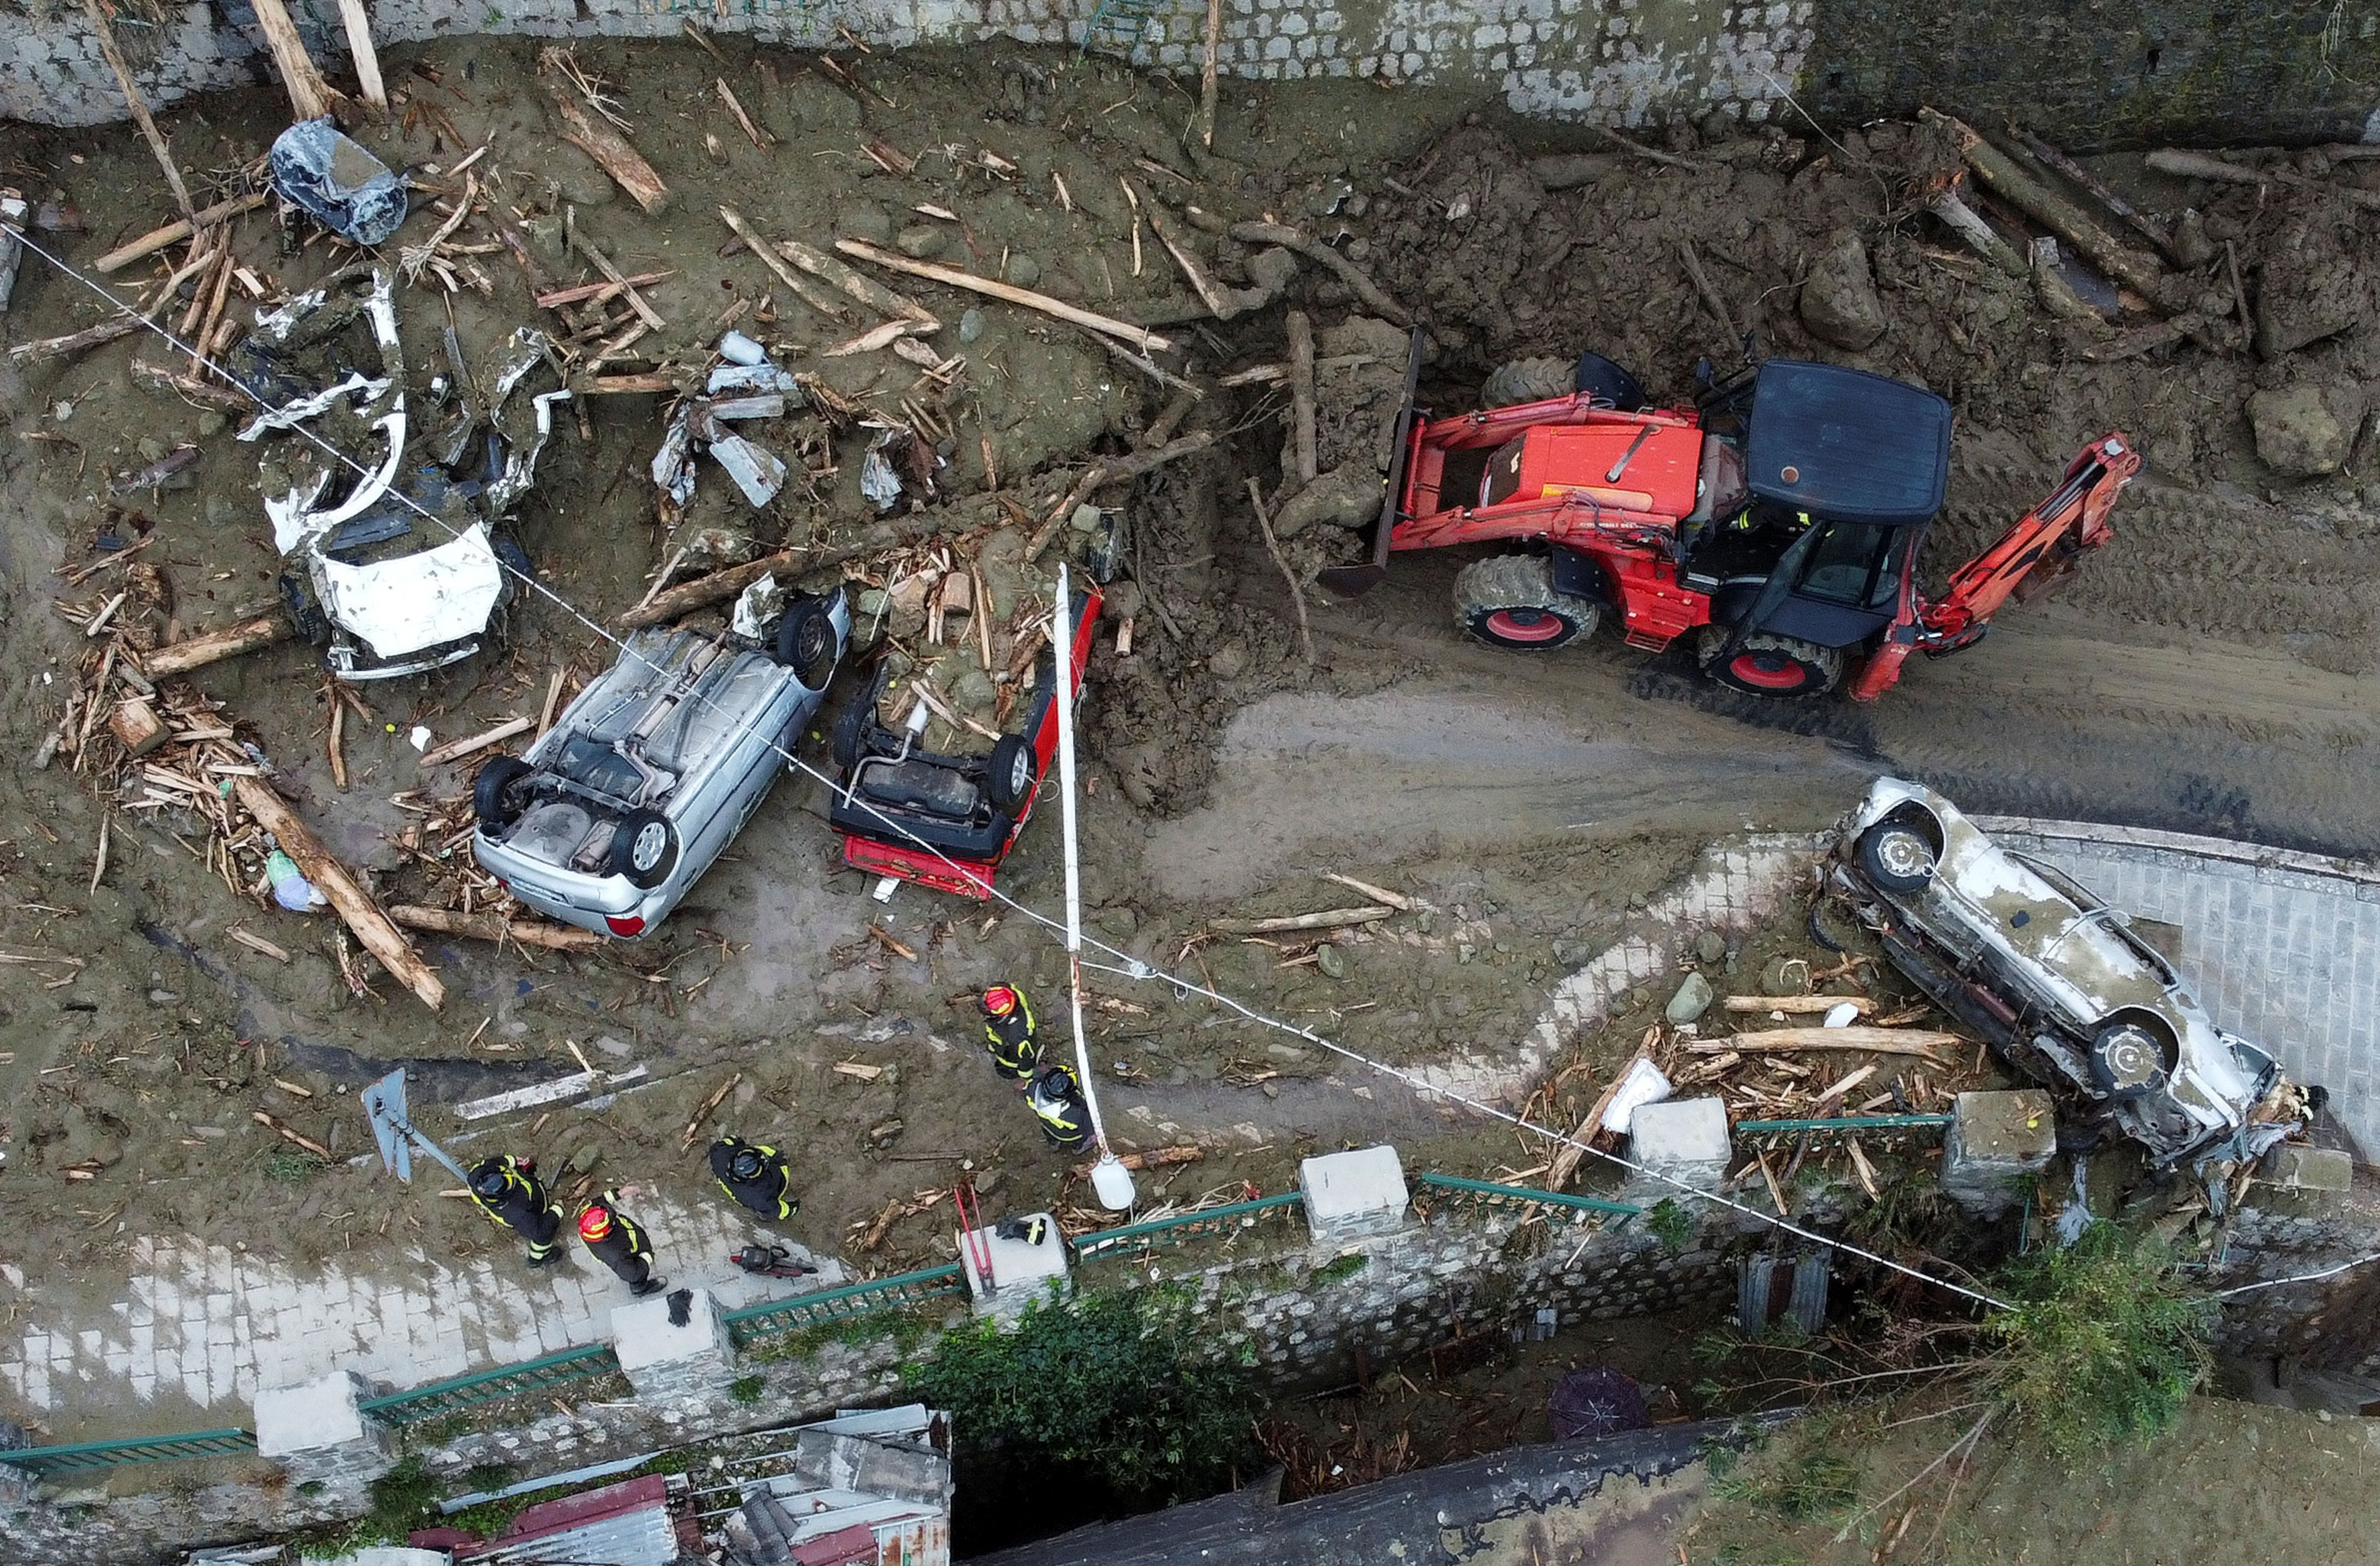 Rescuers work at the scene of a landslide on the Italian holiday island of Ischia, Italy.